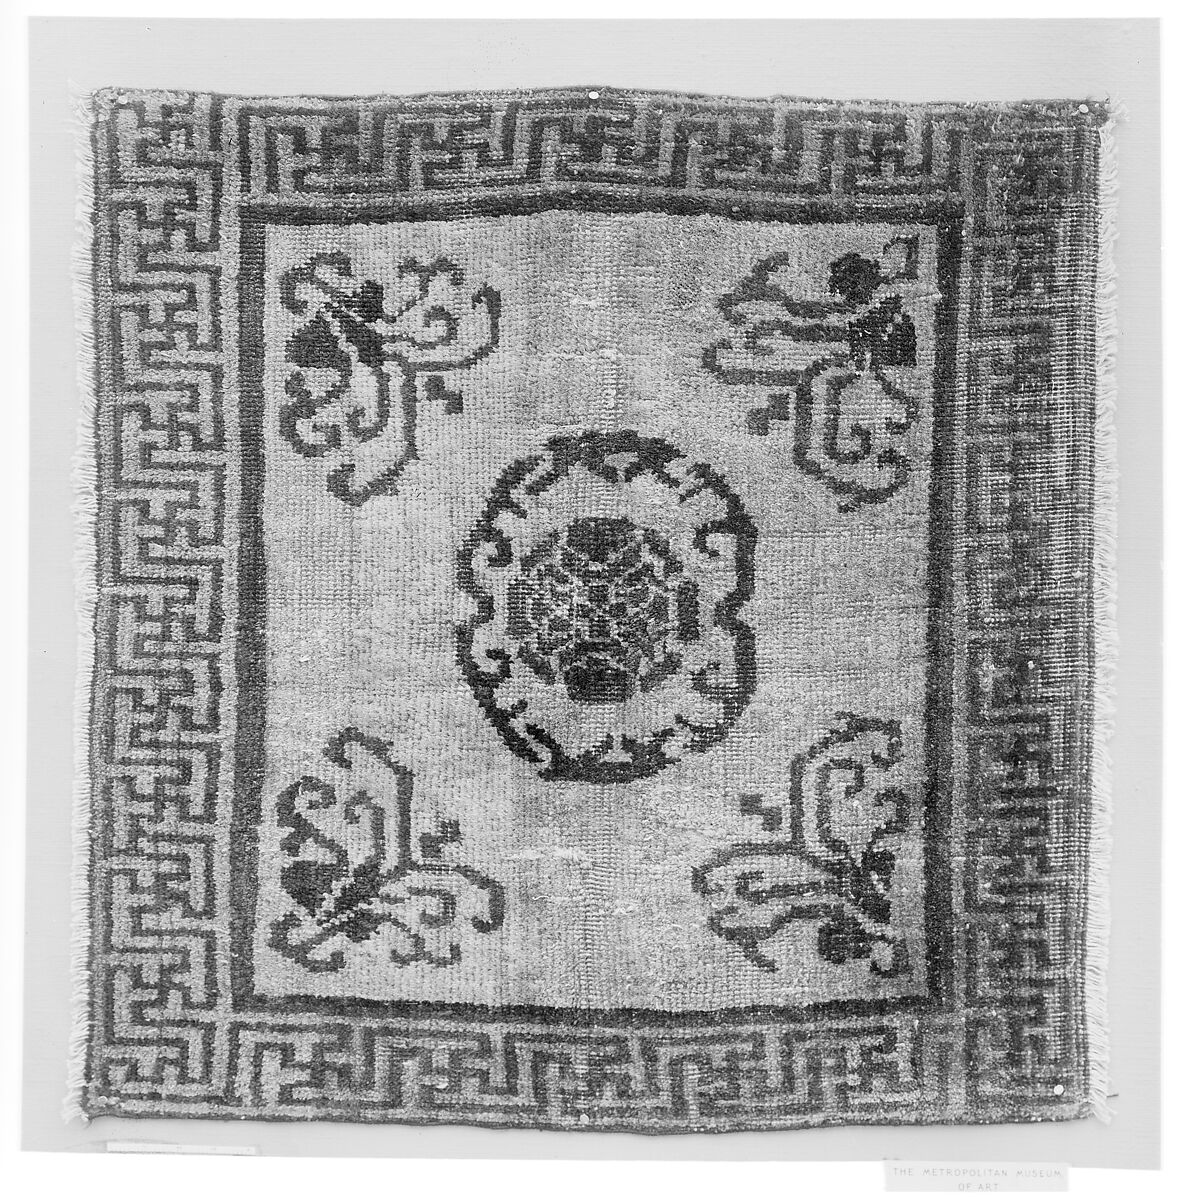 Cushion Cover or Kneeling Mat, Foundation: cotton warp and weft; wool knotting, China 